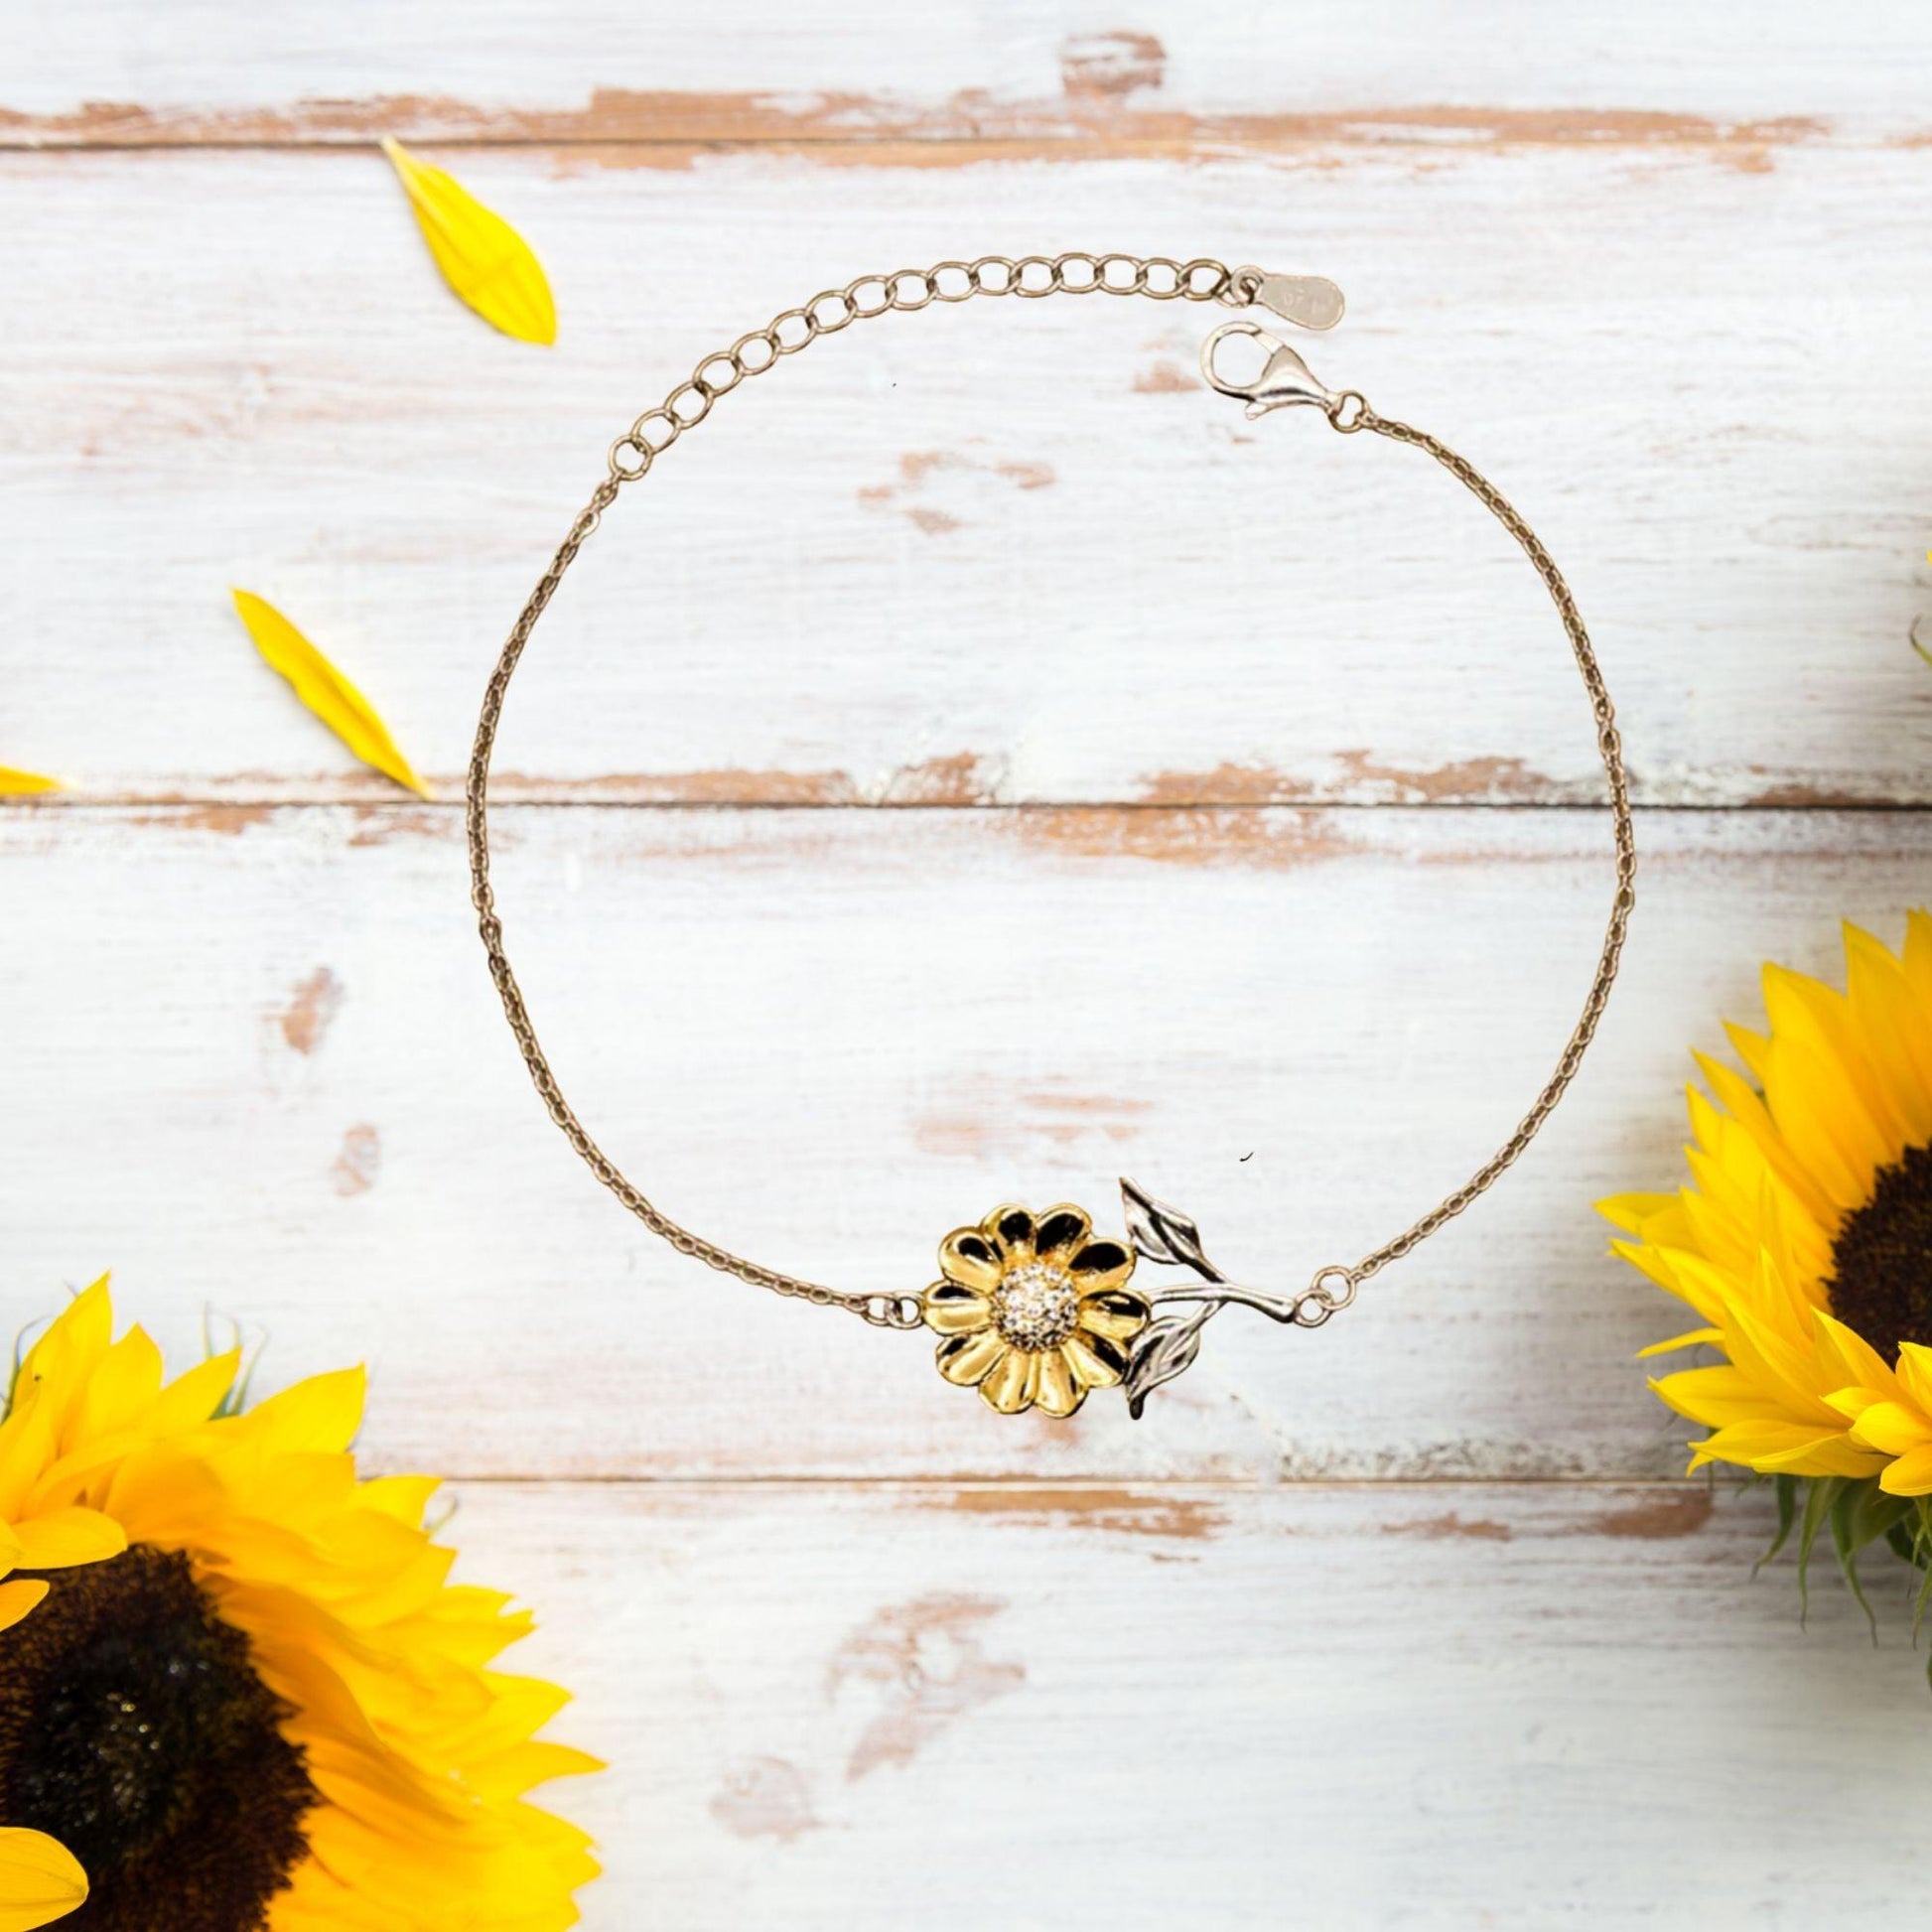 Remarkable Attendant Gifts, Your dedication and hard work, Inspirational Birthday Christmas Unique Sunflower Bracelet For Attendant, Coworkers, Men, Women, Friends - Mallard Moon Gift Shop